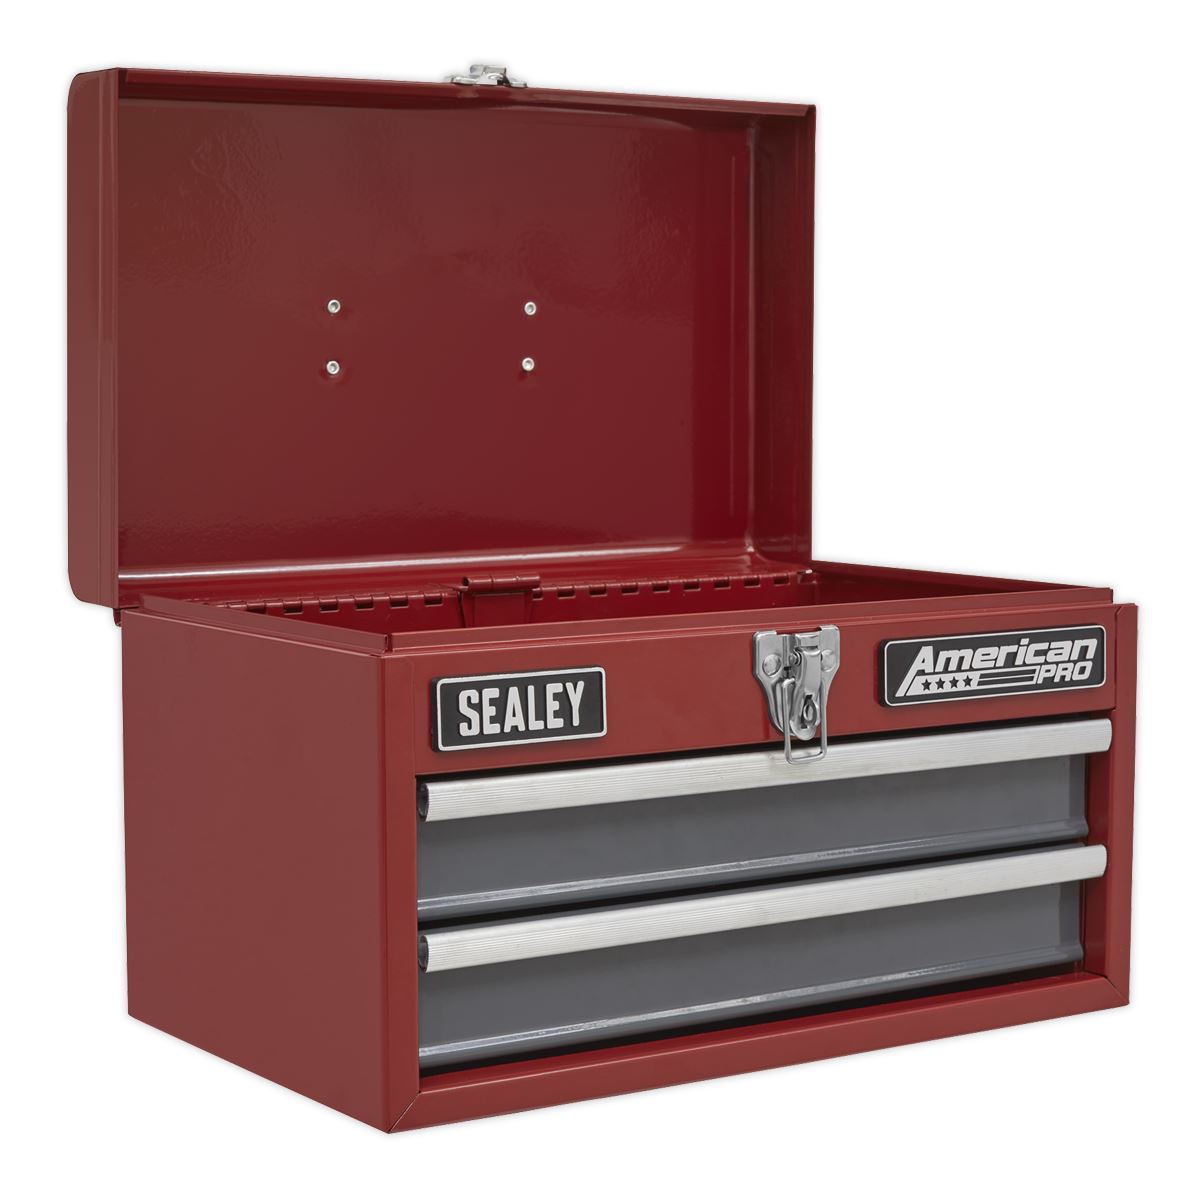 Sealey American Pro Toolbox 2 Drawer with Ball-Bearing Slides